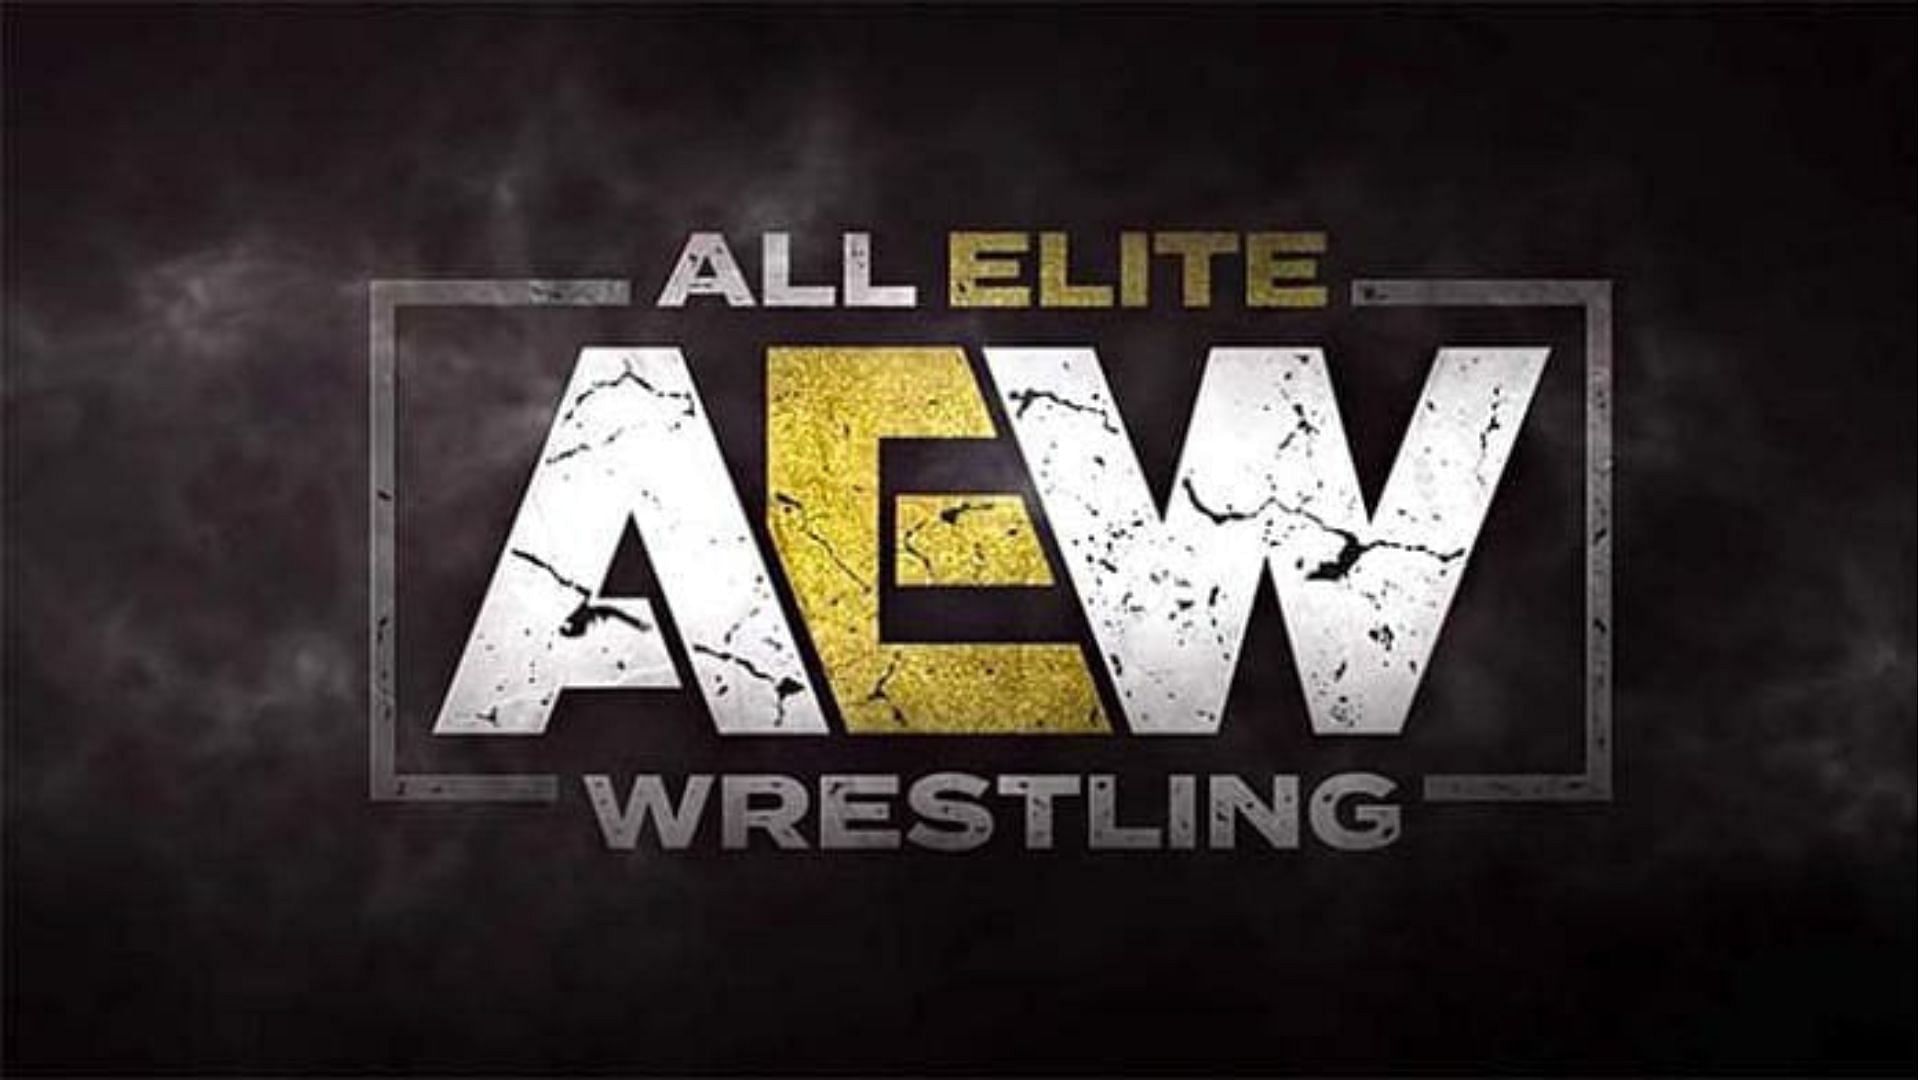 AEW provided an update on injury